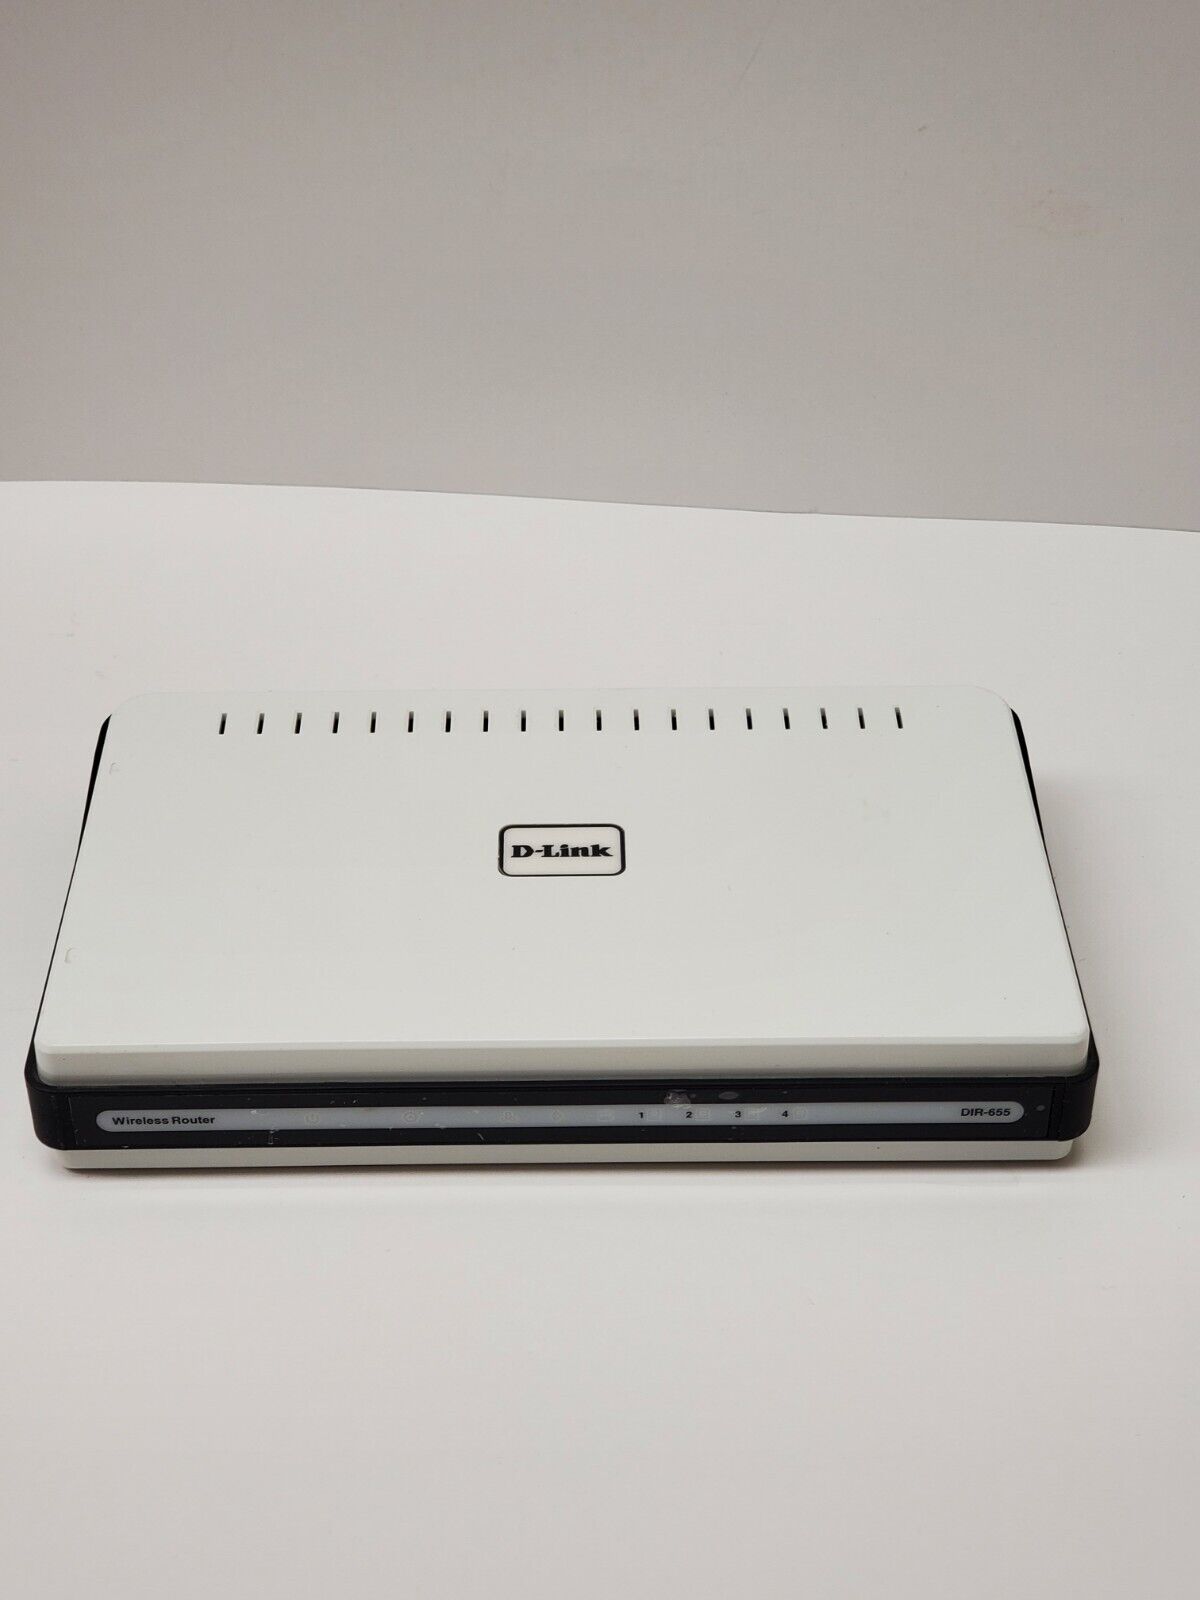 D-Link DIR-655 Wireless Router Pre Owned AS IS...No Antennas, No cables,untested